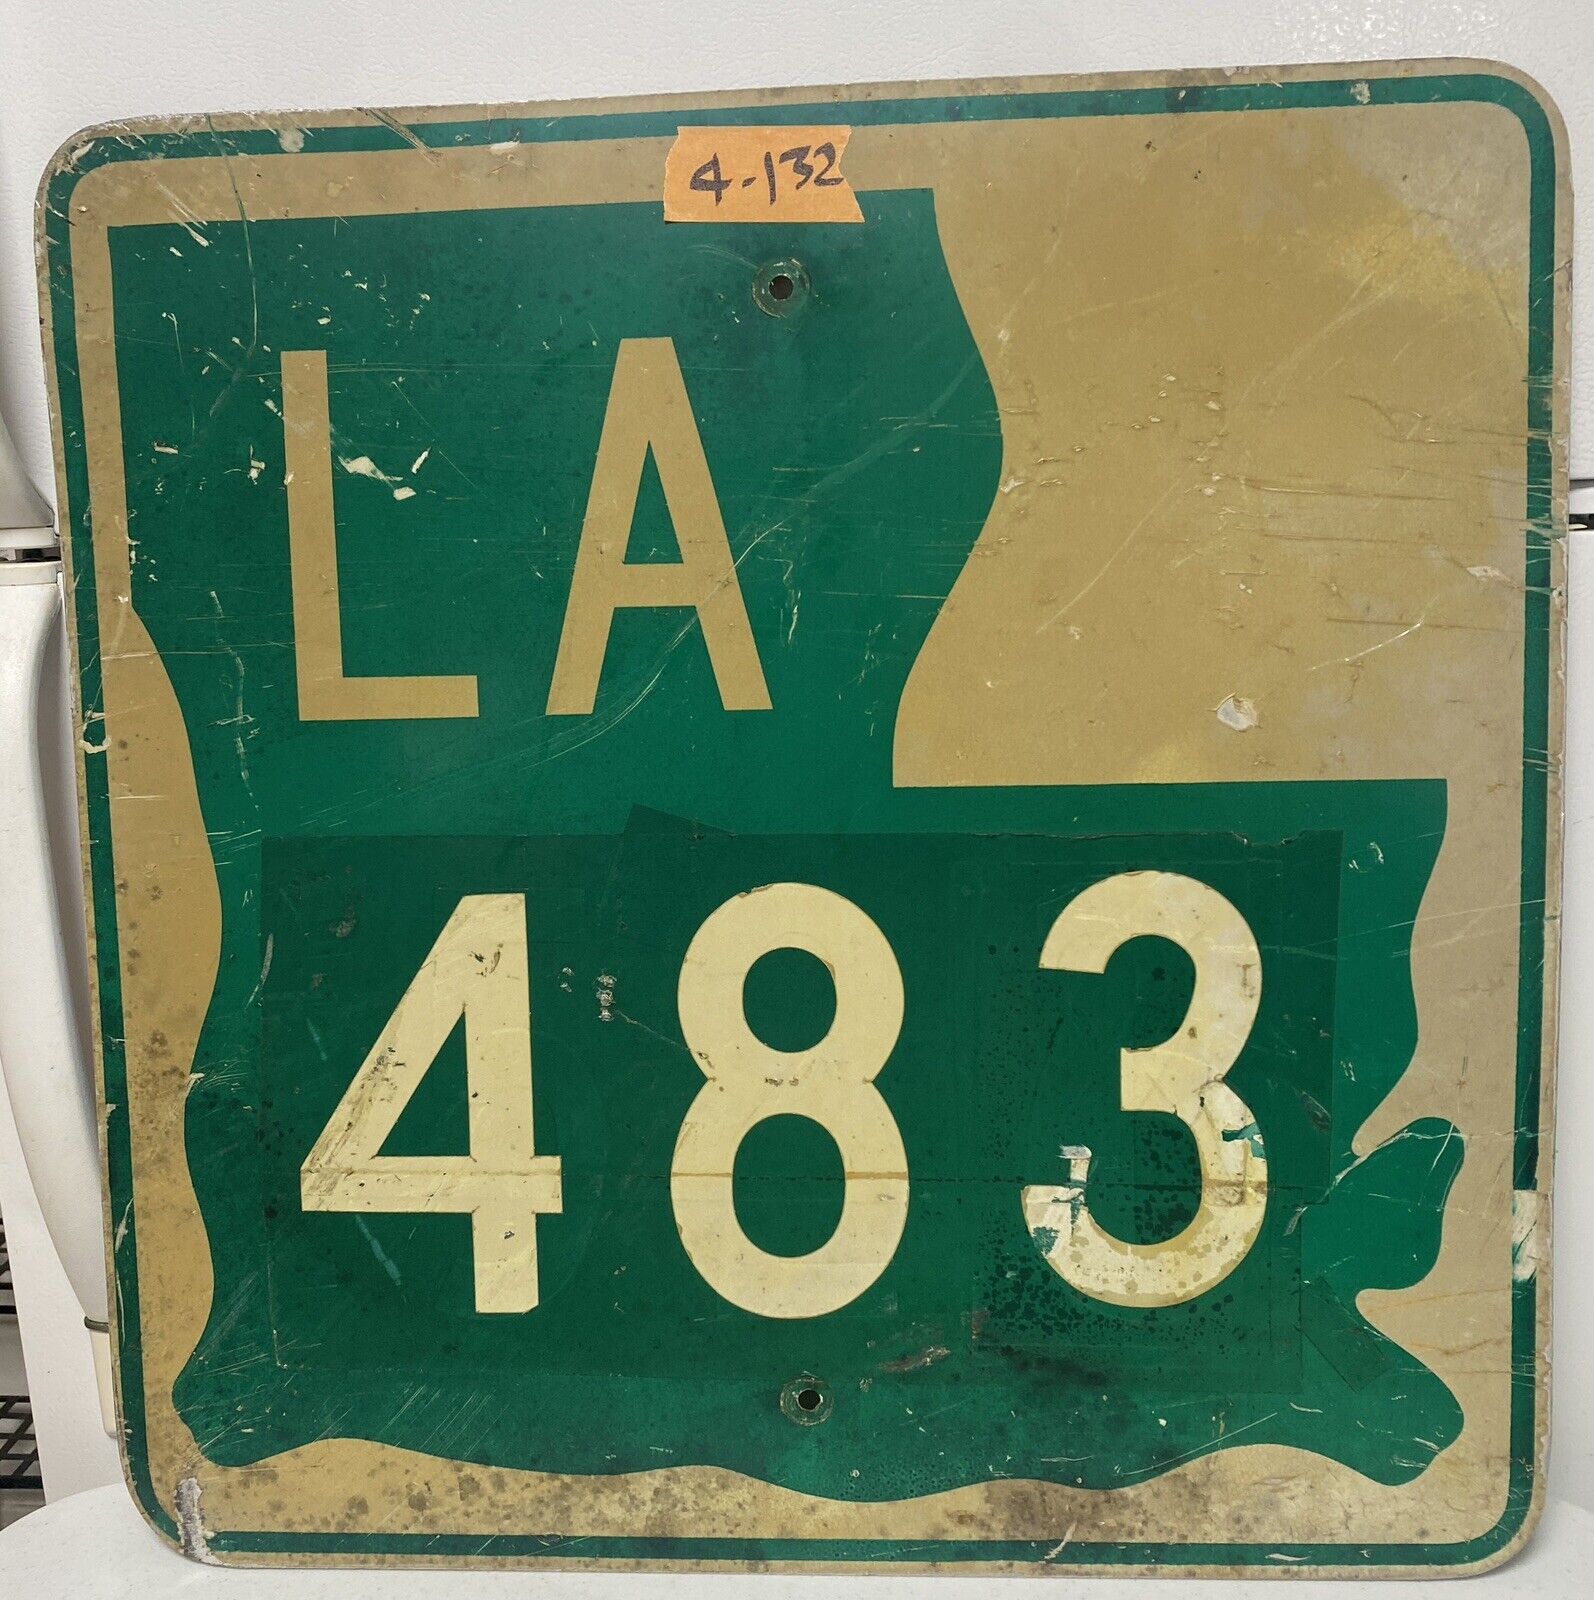 Authentic Retired Road Sign  Louisiana Route 483  Lower 48  4-132